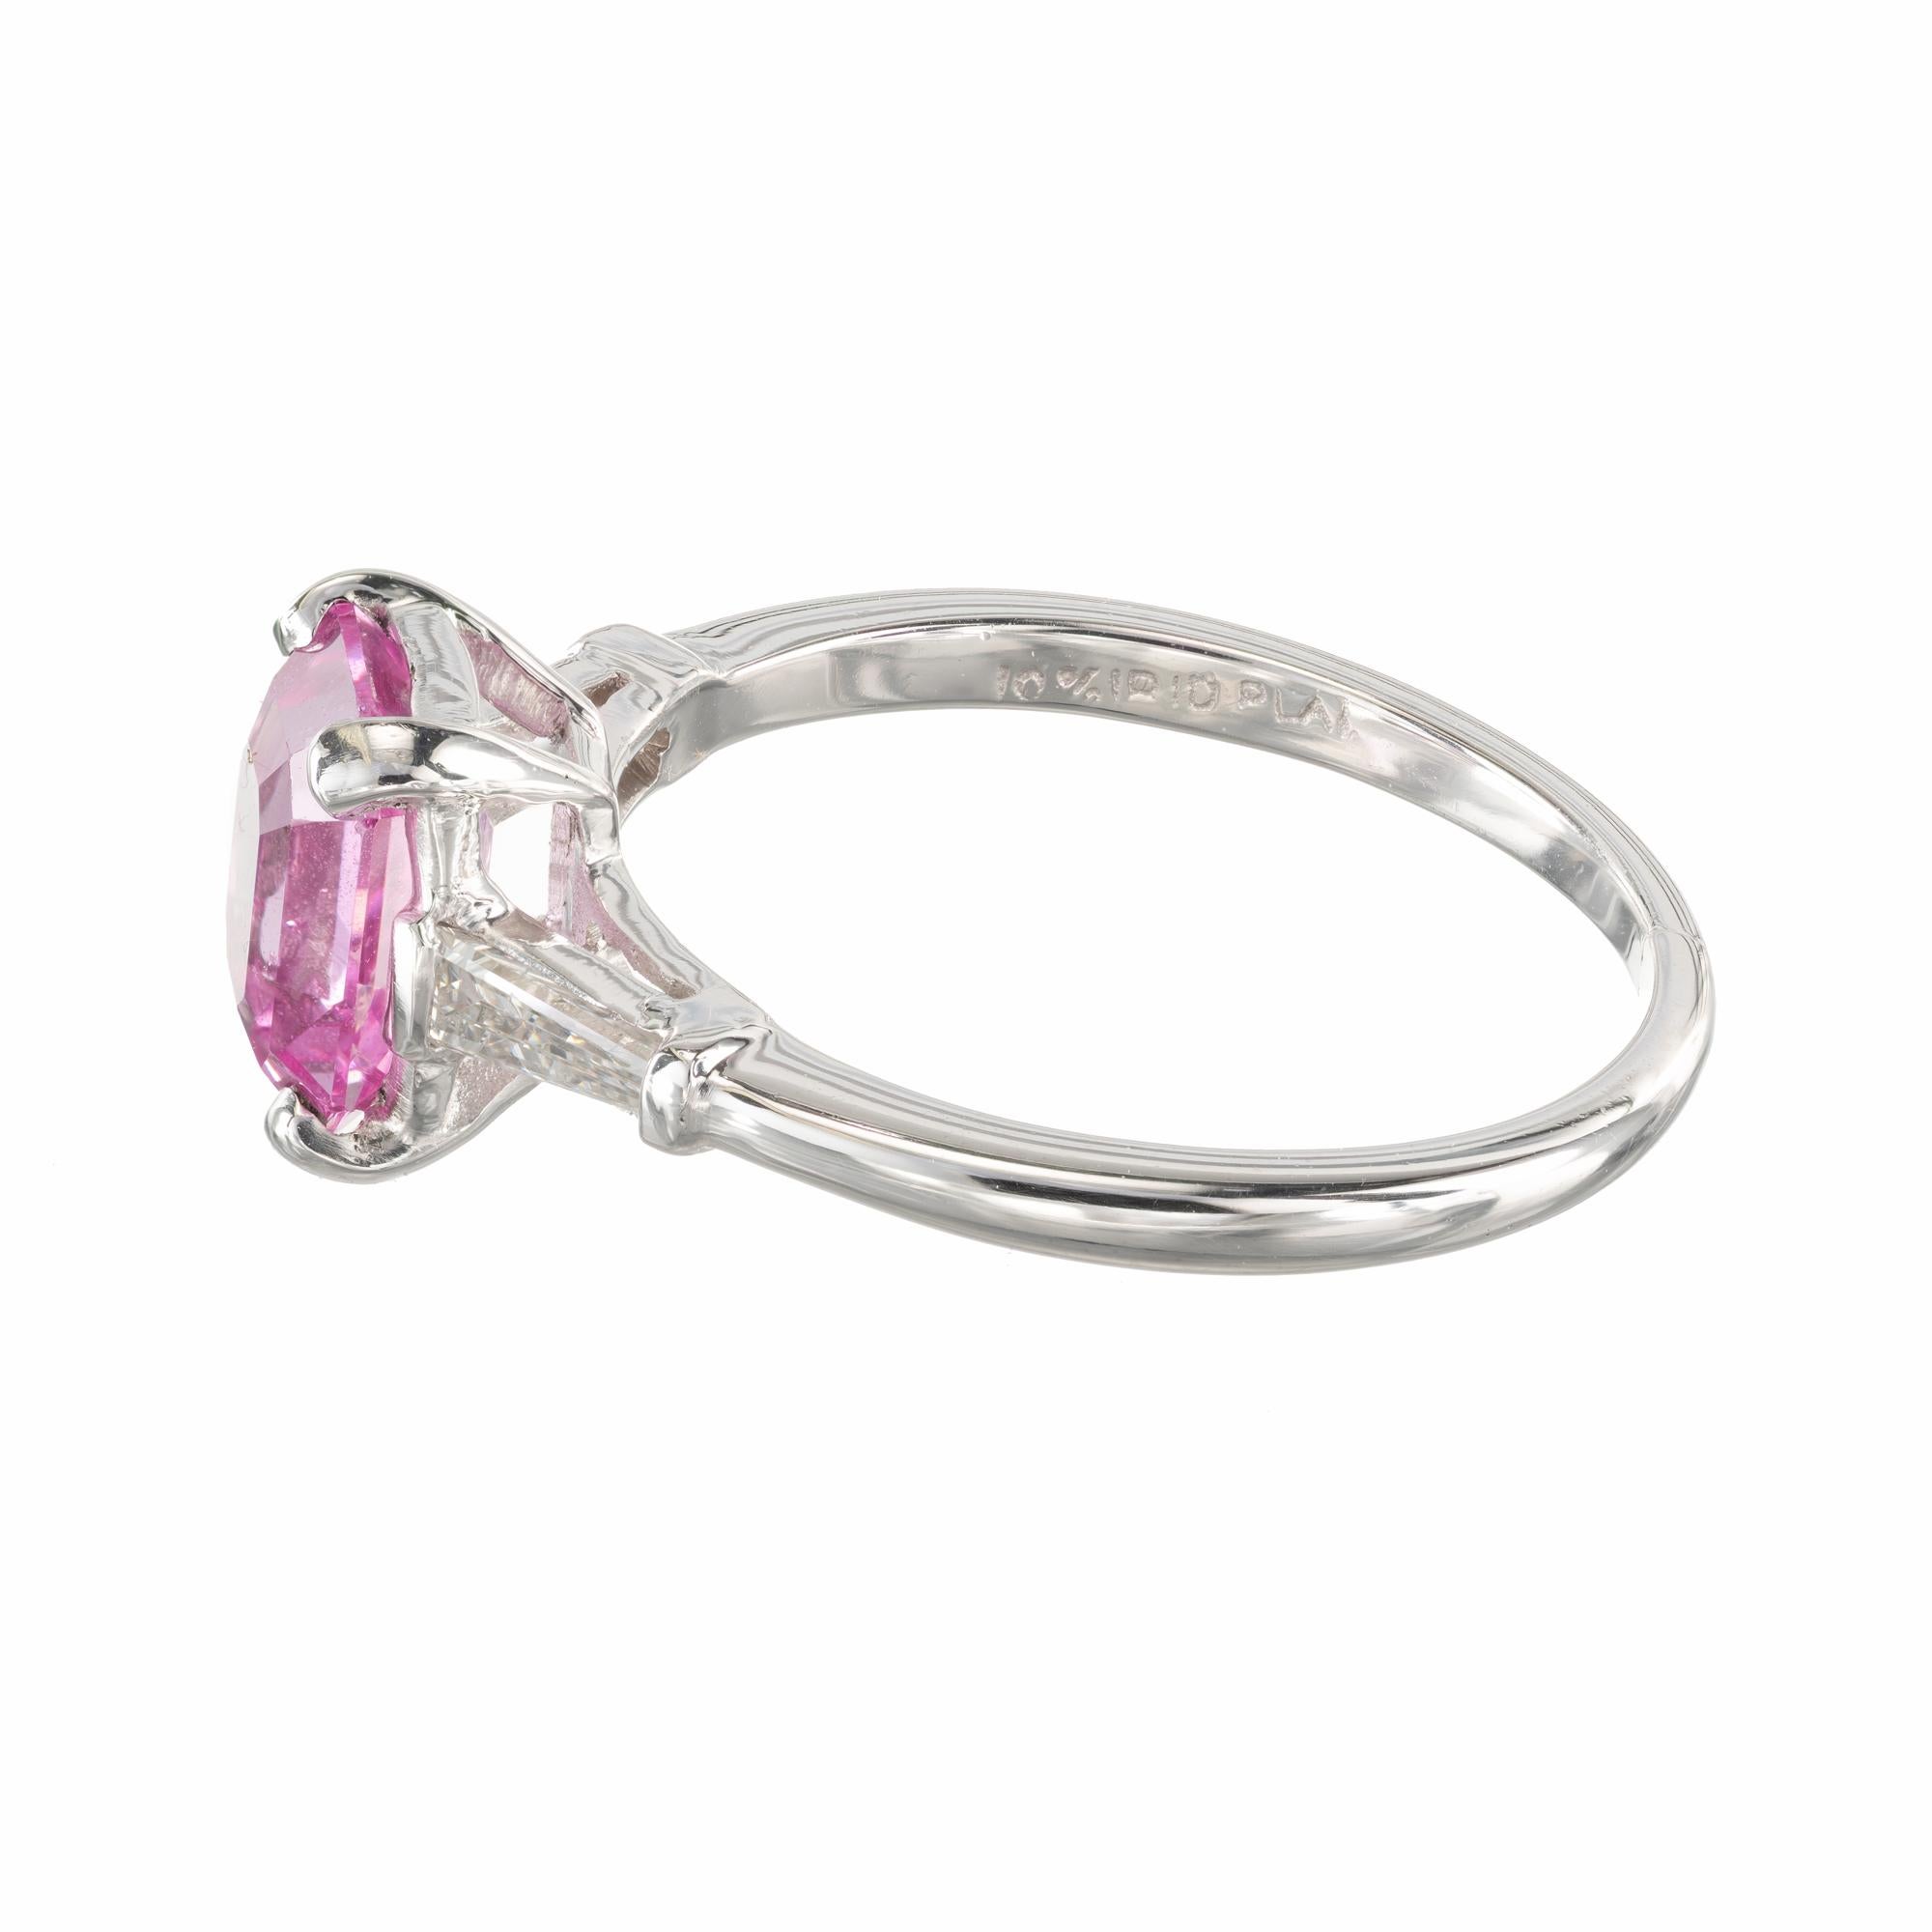 GIA Certified 1.82 Carat Pink Sapphire Diamond Platinum Engagement Ring In Excellent Condition For Sale In Stamford, CT